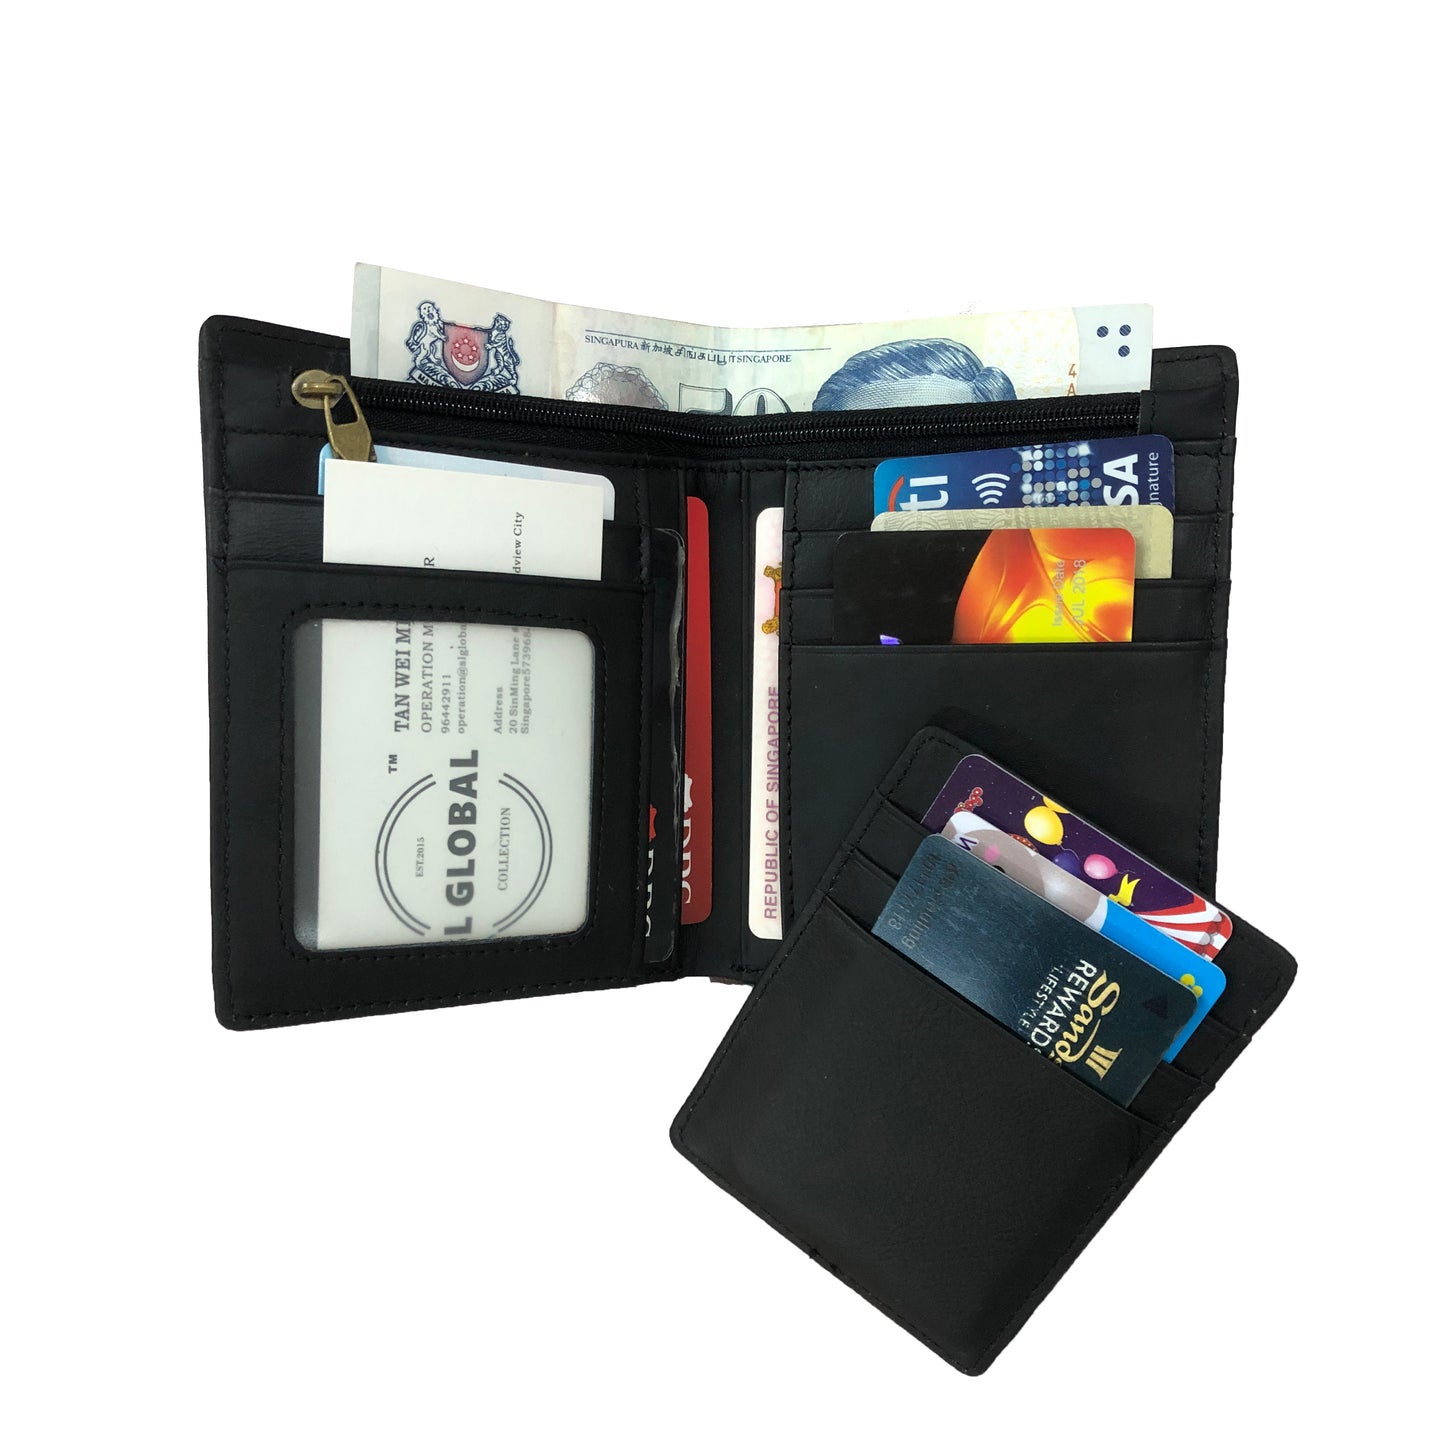 Women's and Men's unisex cowhide leather vertical flap wallet with additional card slot insert